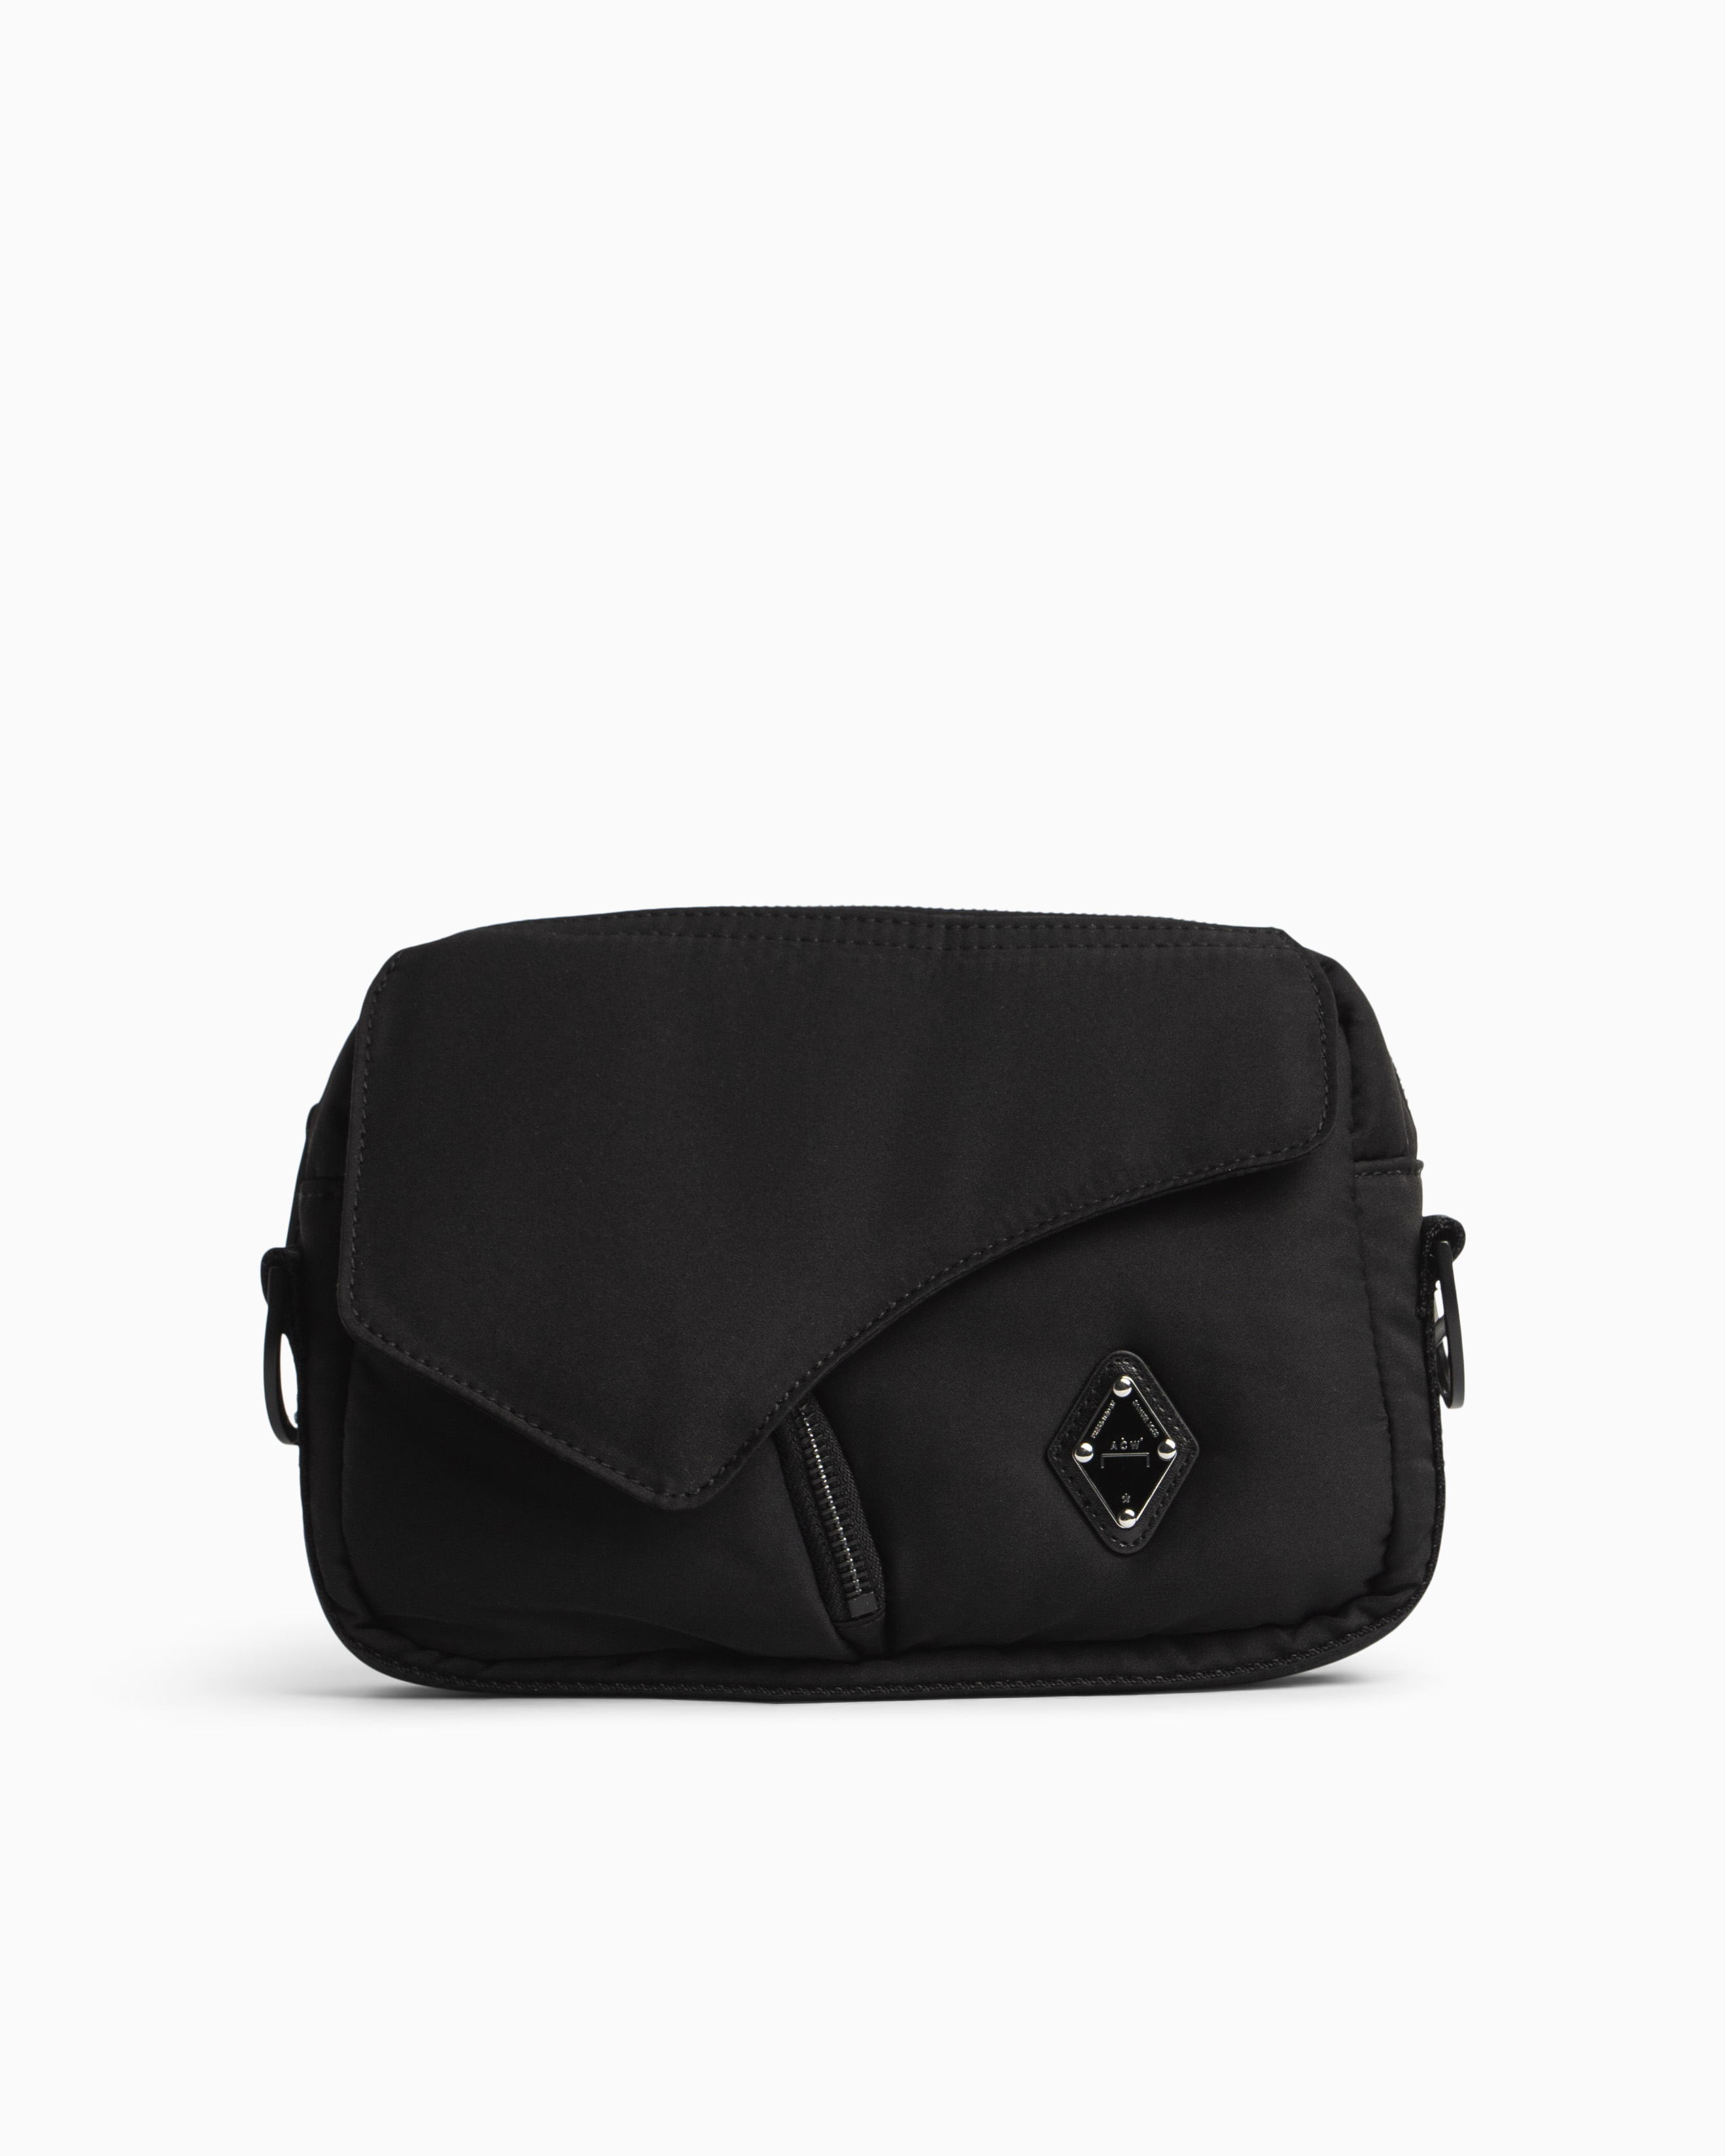 A-COLD-WALL* Shale Padded Envelope Bag in Black